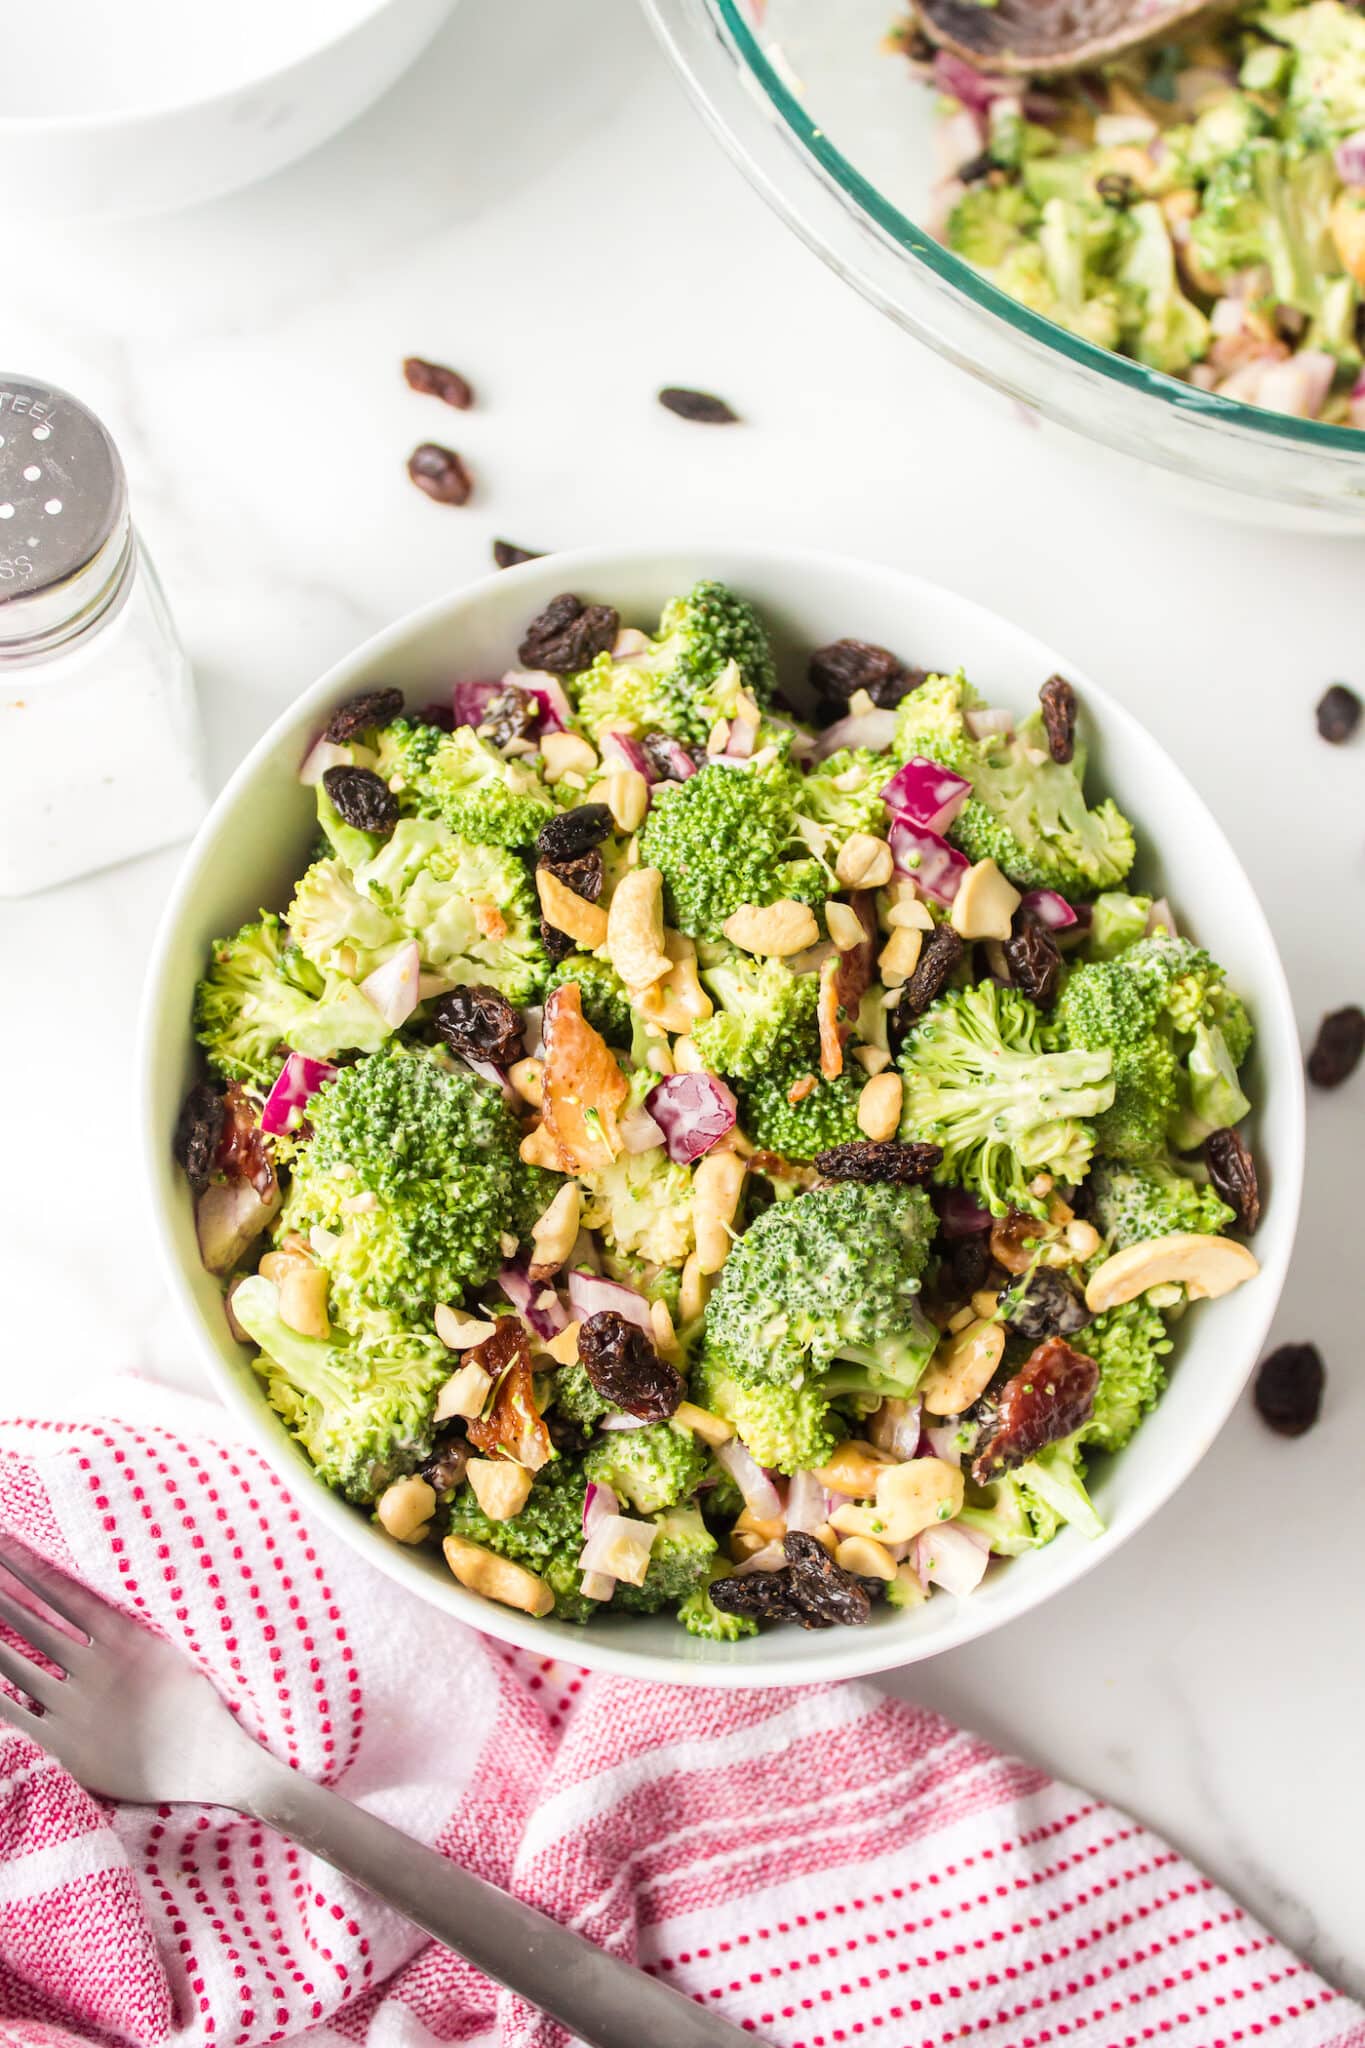 Broccoli crunch salad with raisins and cashews in a white bowl.